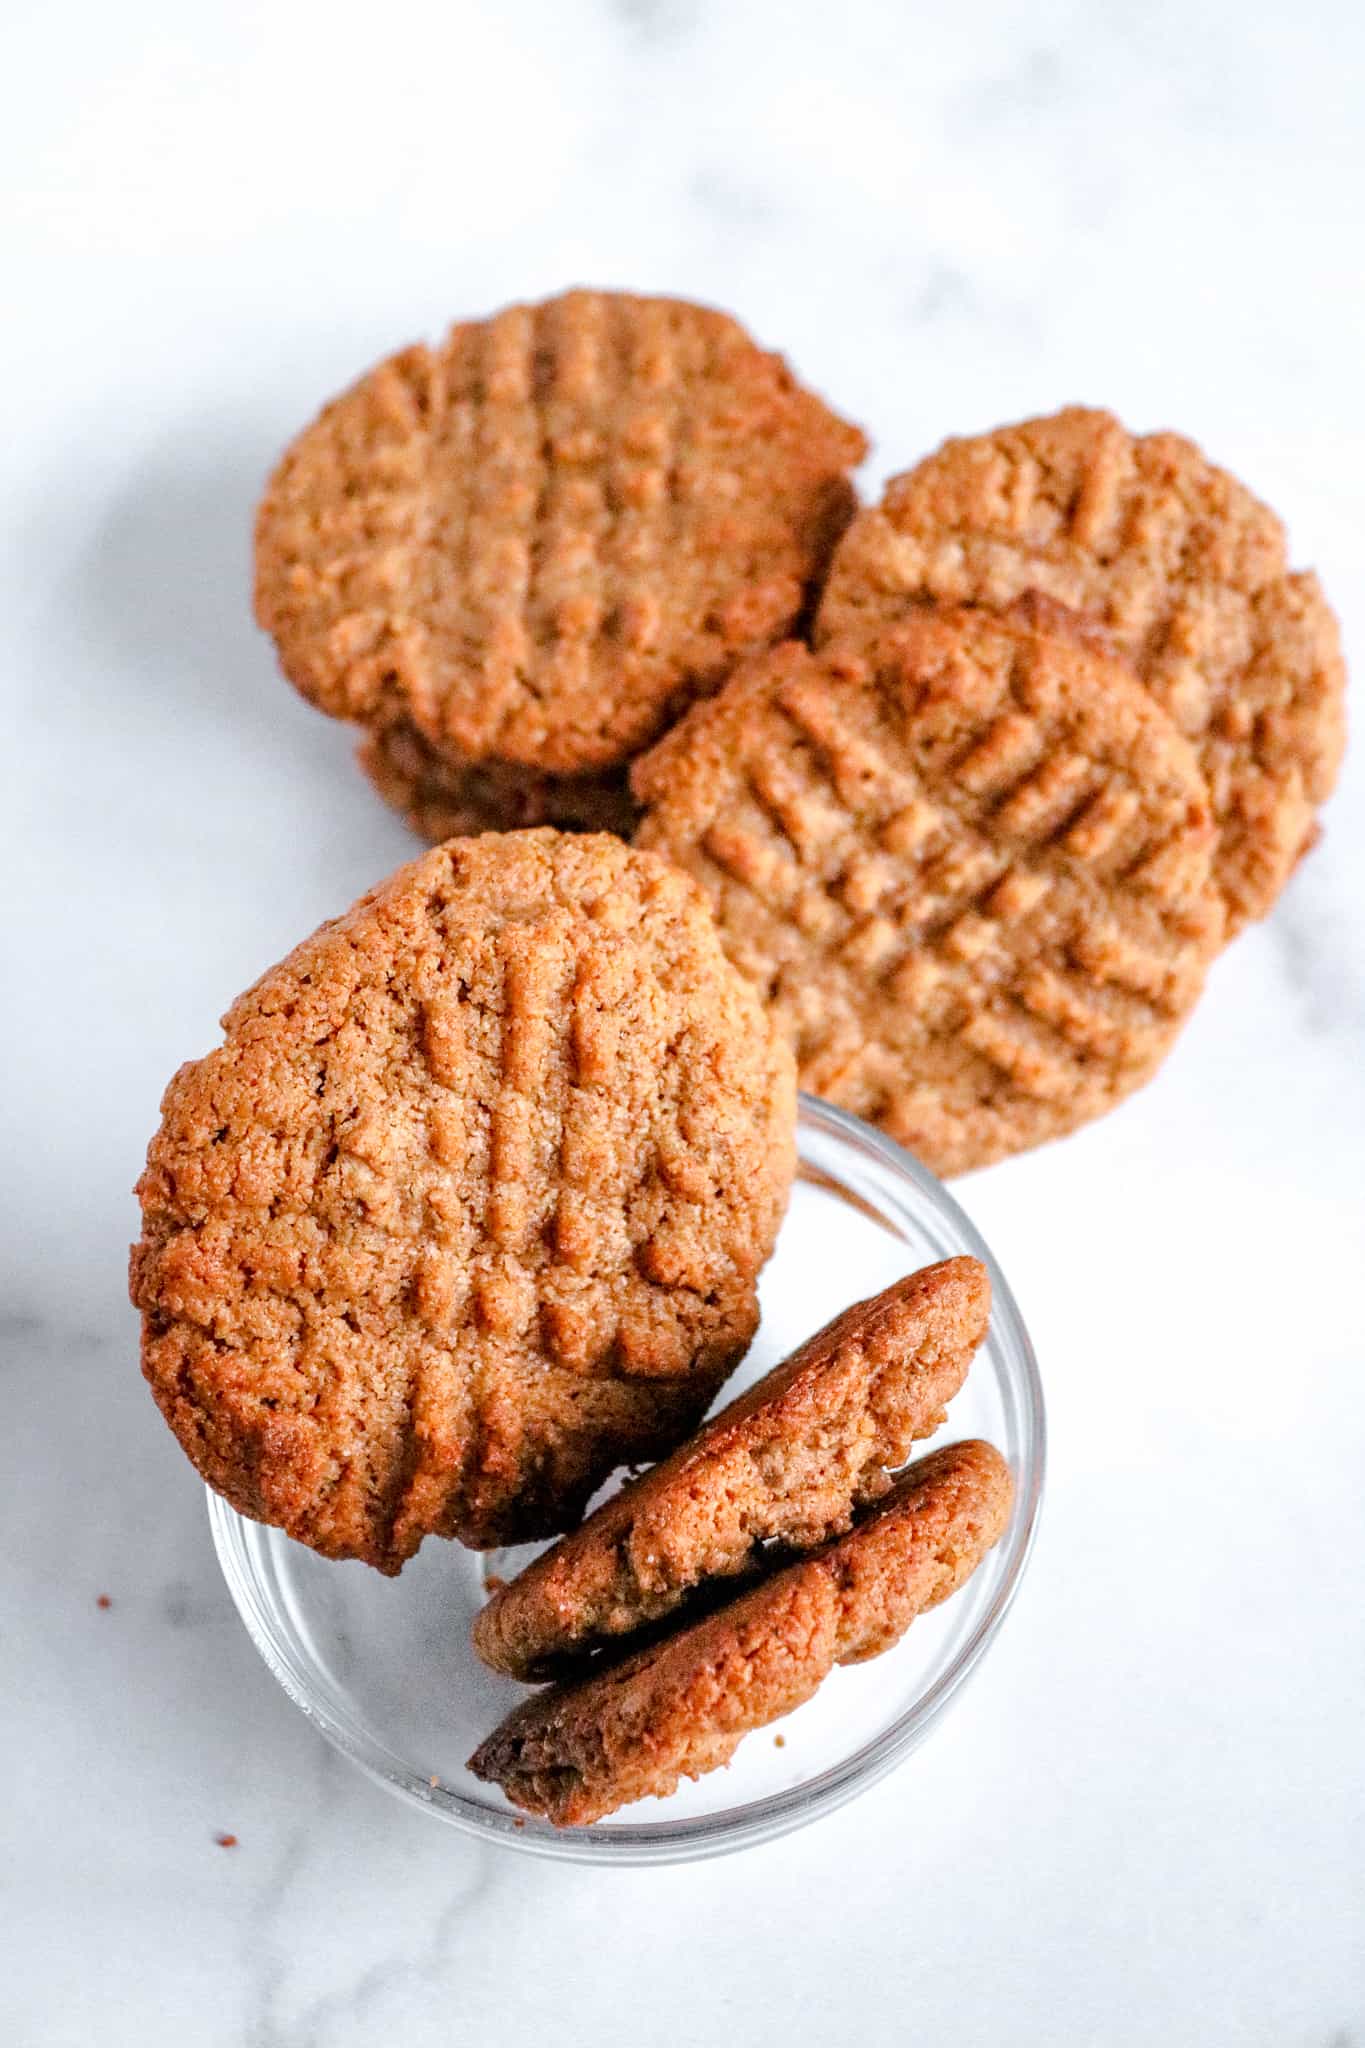 Keto Almond Butter Cookies That Are (Almost) Too Good To Believe